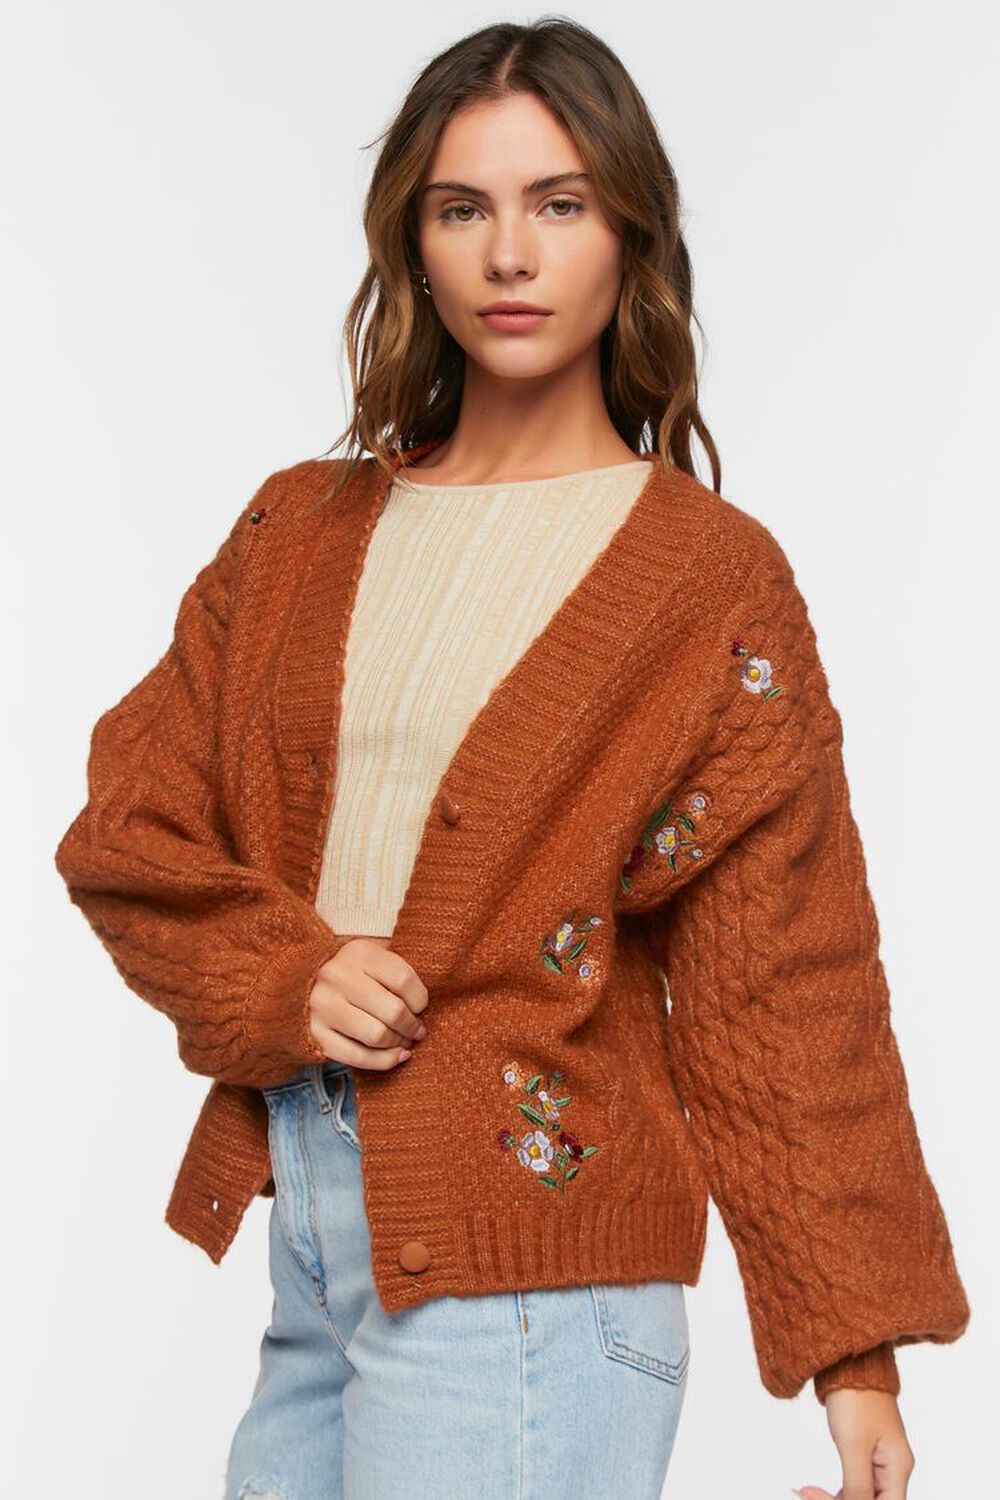 RUST/MULTI Floral Embroidered Cardigan Sweater, image 3